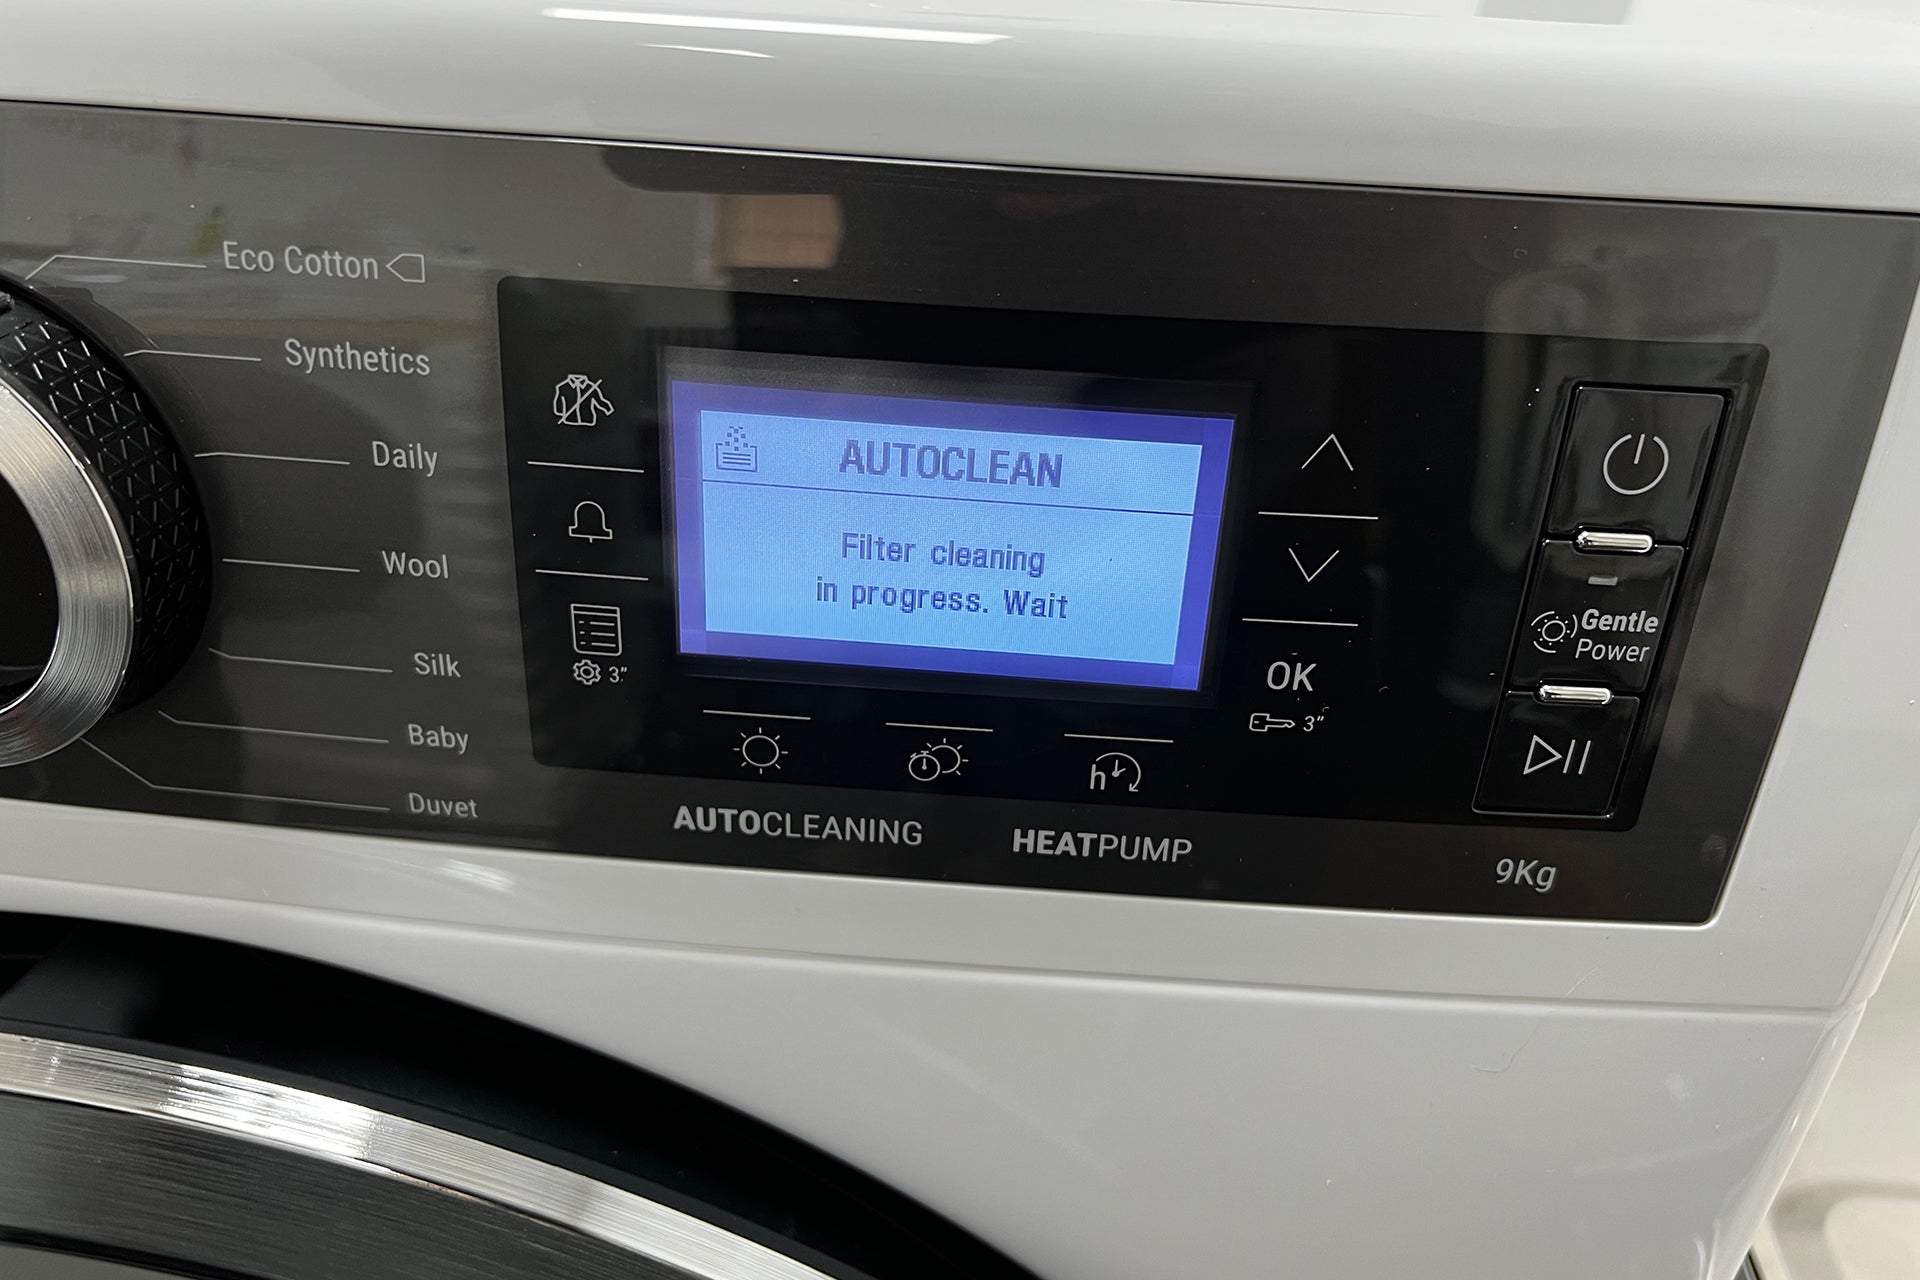 The Hotpoint H8 D93WB UK's filter cleaning 